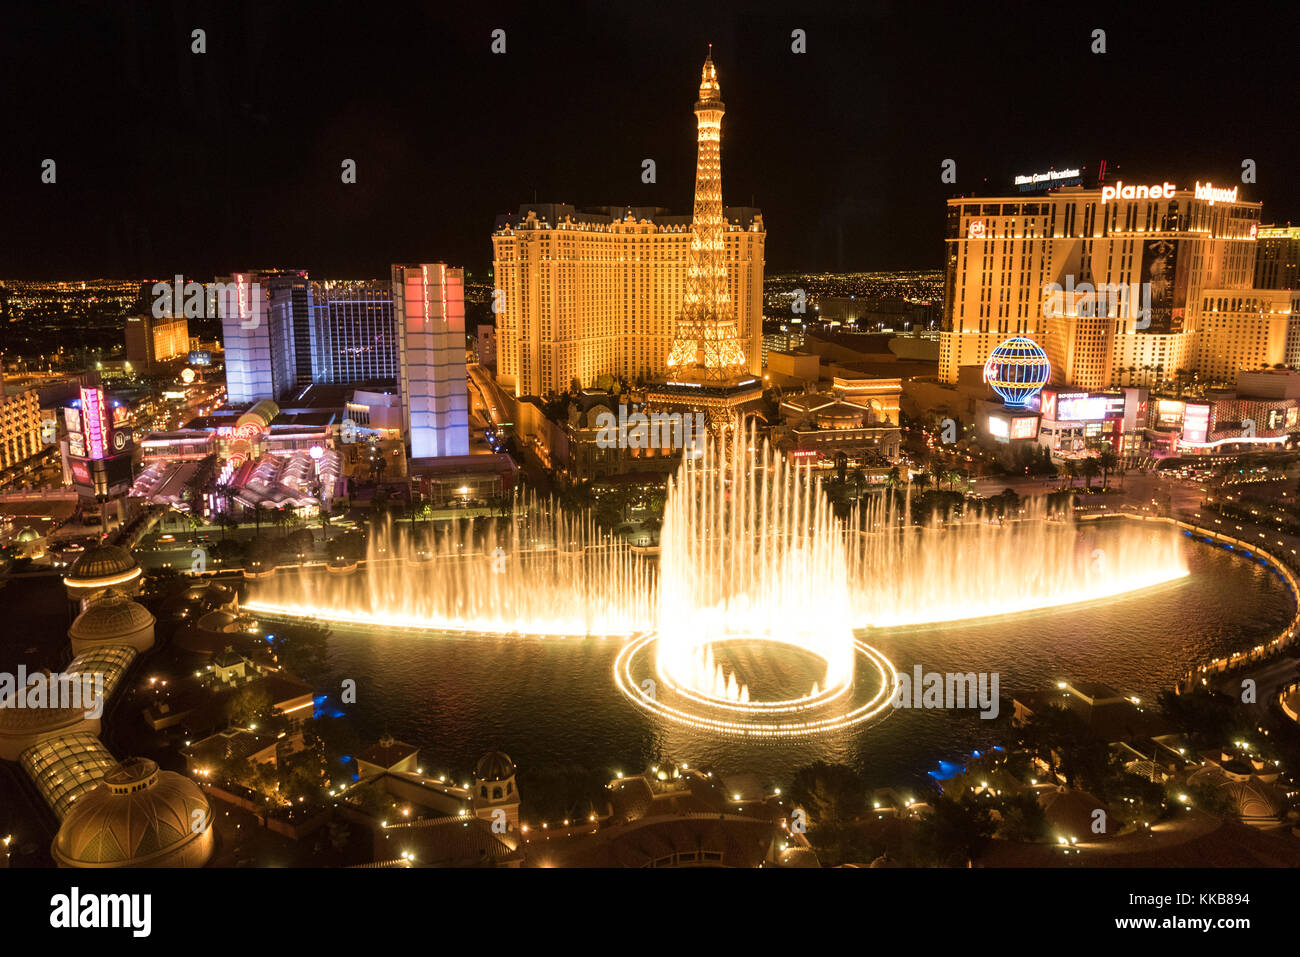 View of Bellagio fountains and part of the Strip at night, Las Vegas, Nevada, USA Stock Photo